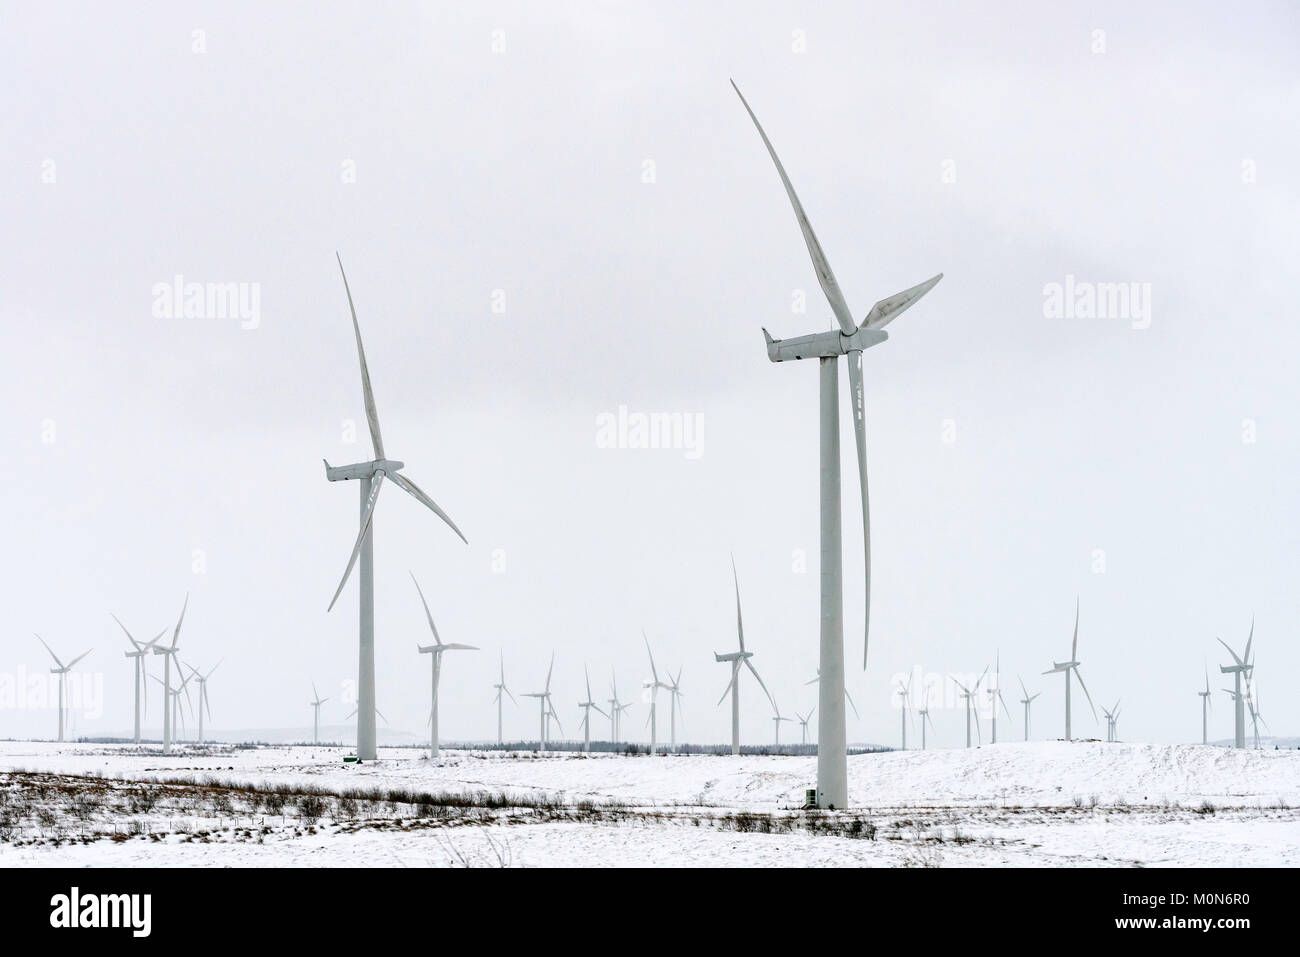 View of wind turbines at Whitelee Windfarm in East Renfrewshire operated by Scottish power, Scotland, United Kingdom Stock Photo